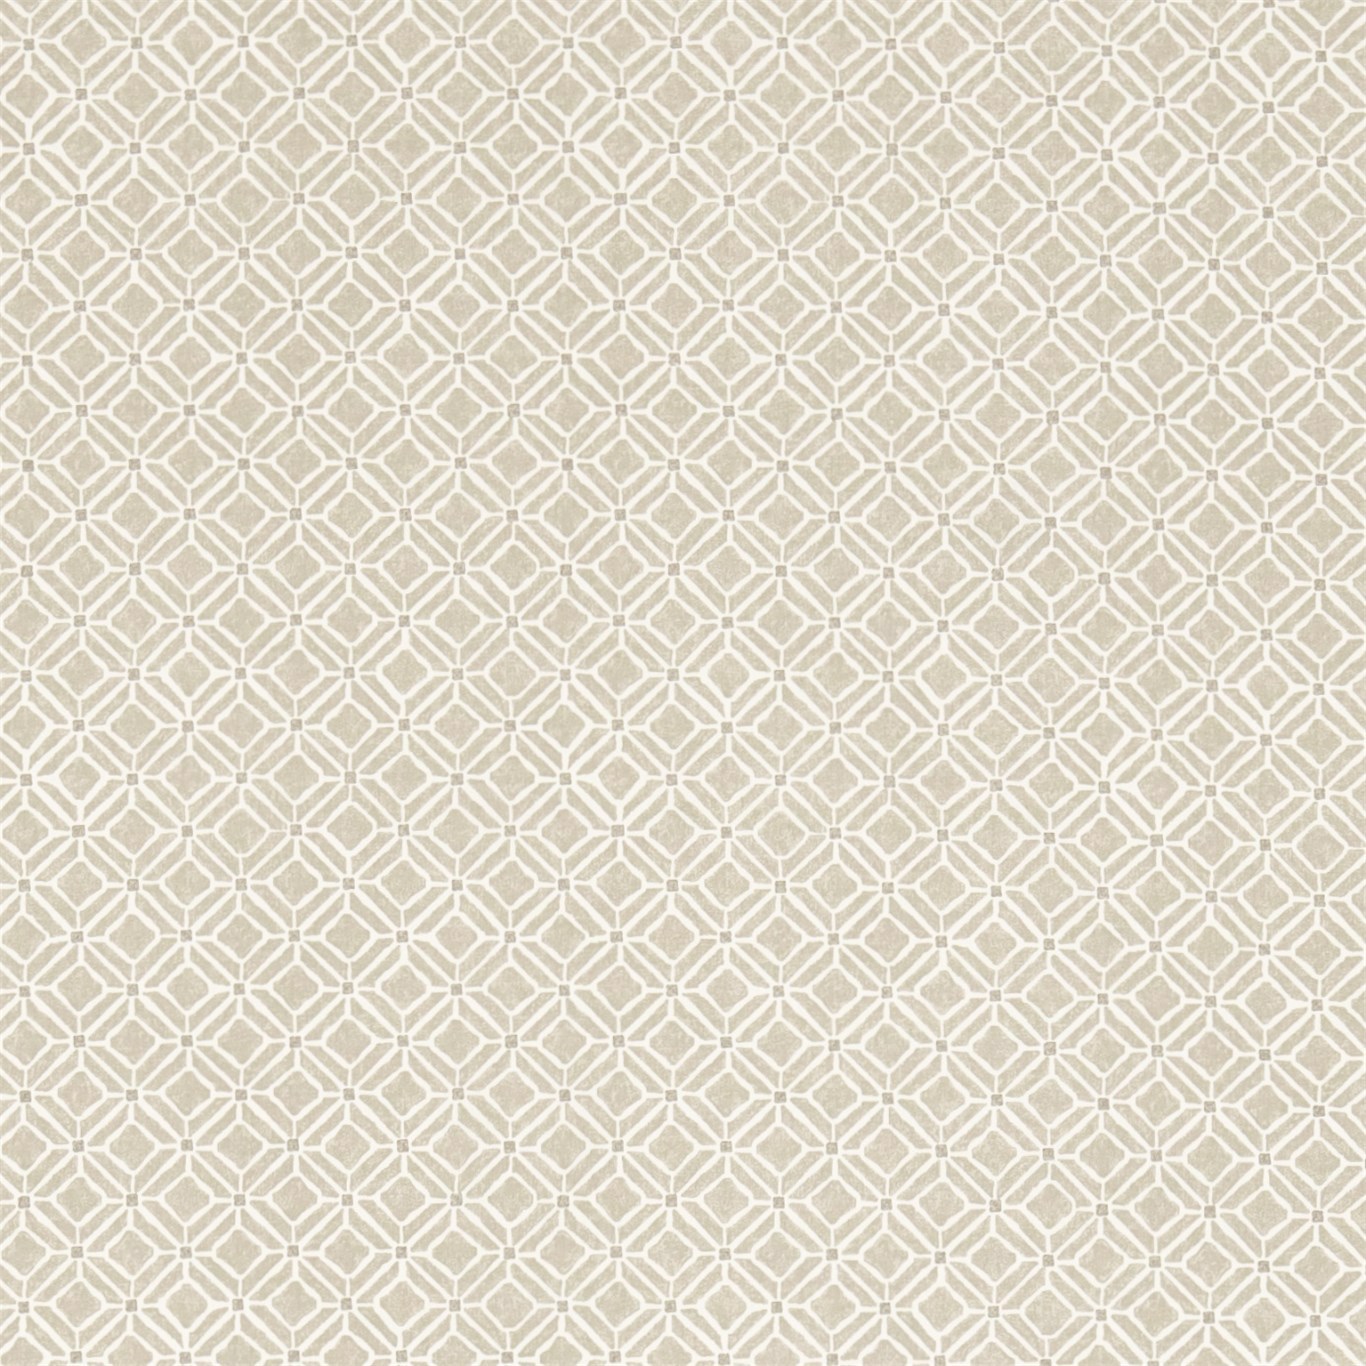 Fretwork Linen/Taupe Fabric by SAN